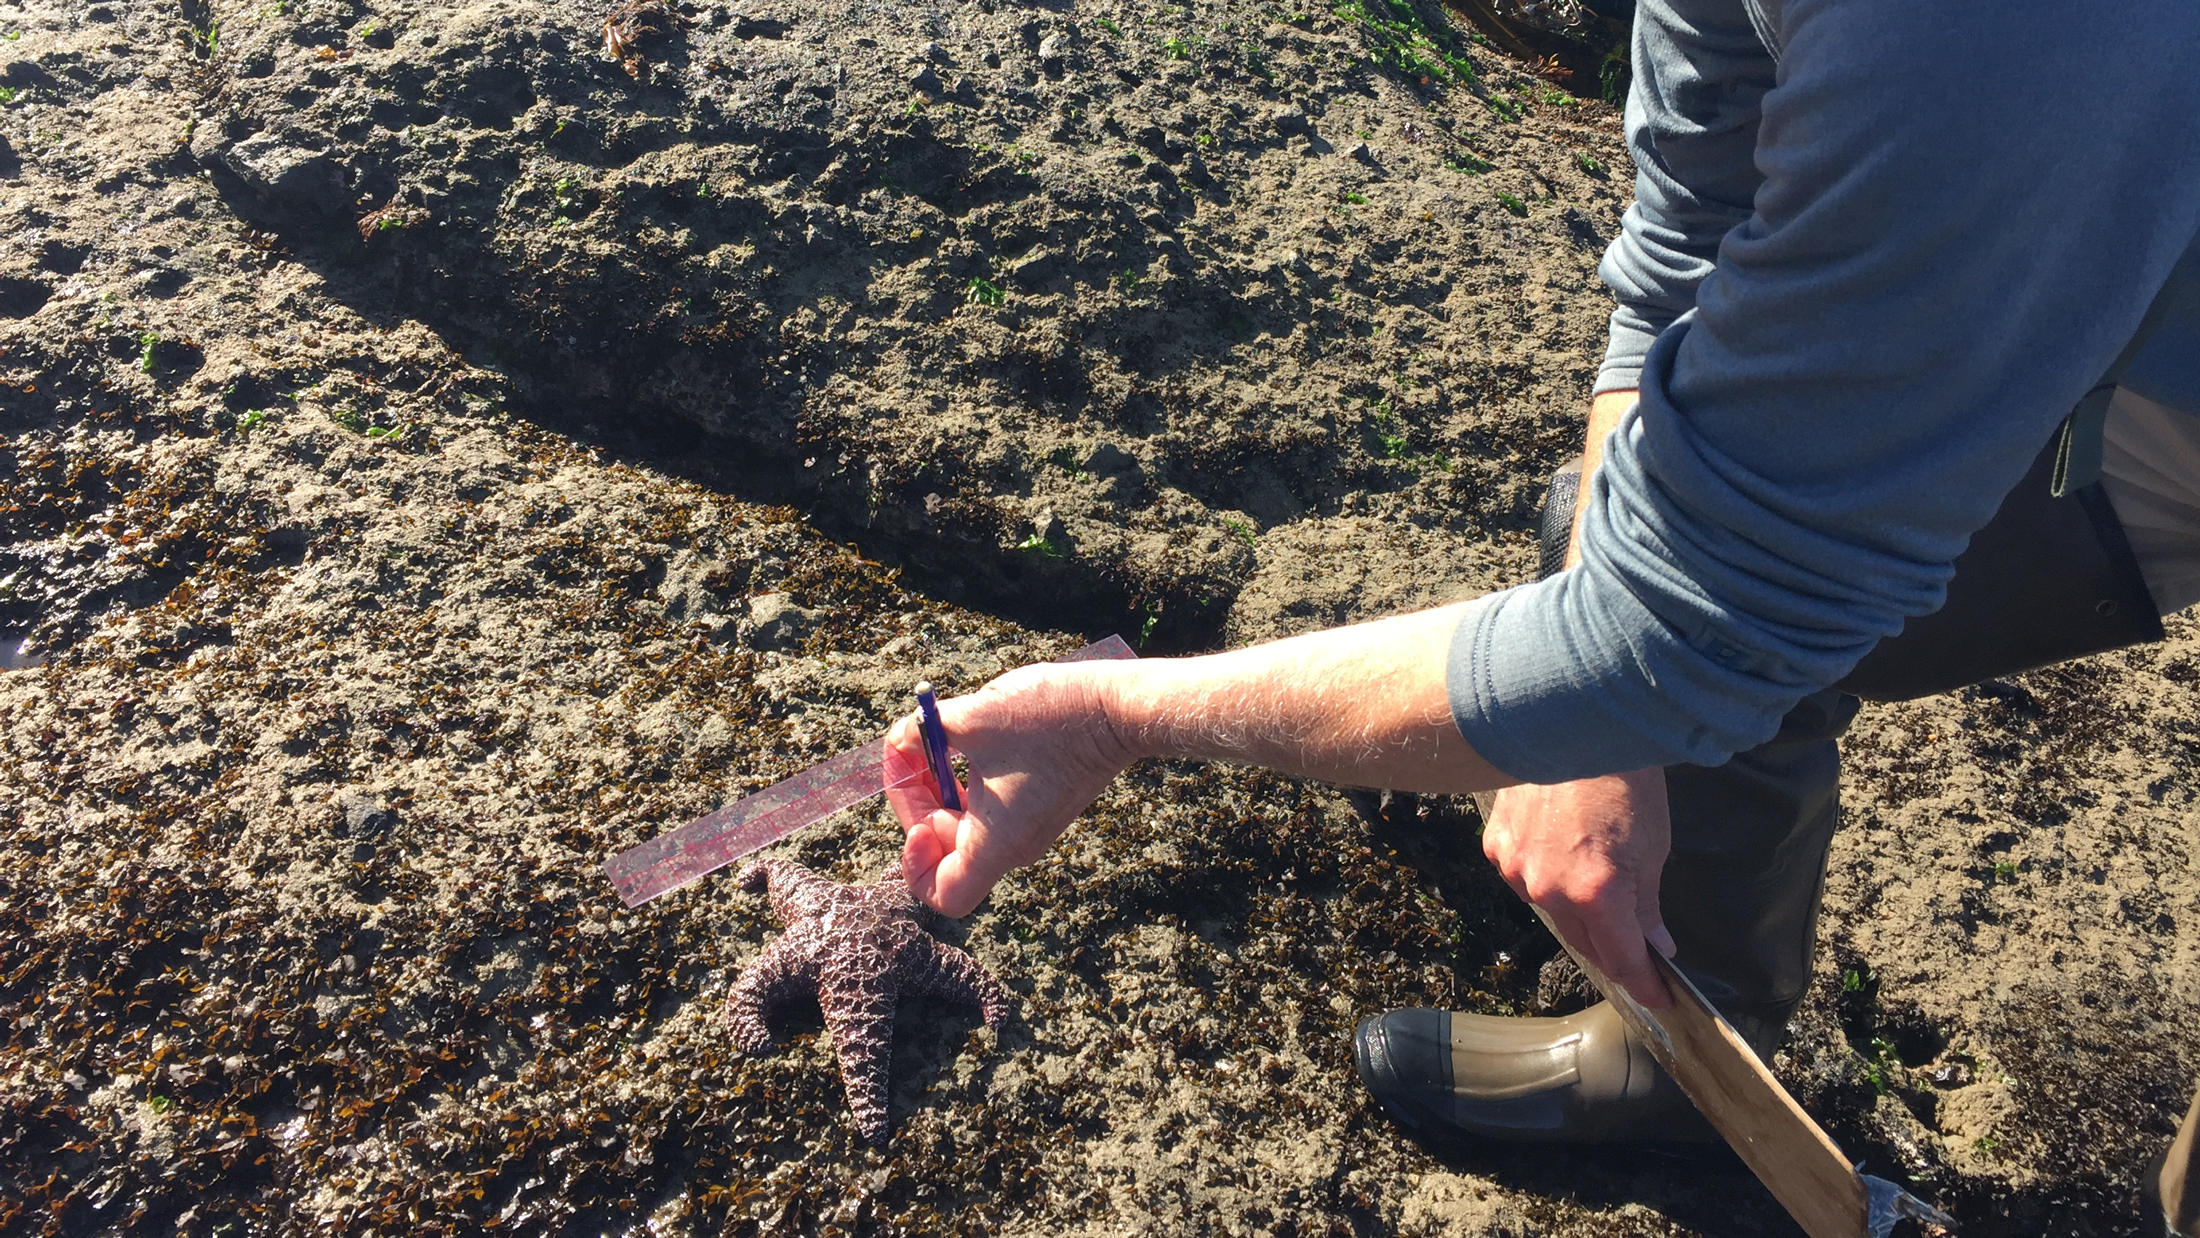 Monitoring includes gathering data on the various sizes of sea stars, measuring from the center of their body to the end of one arm. Photo © The Nature Conservancy (Julia Amato)